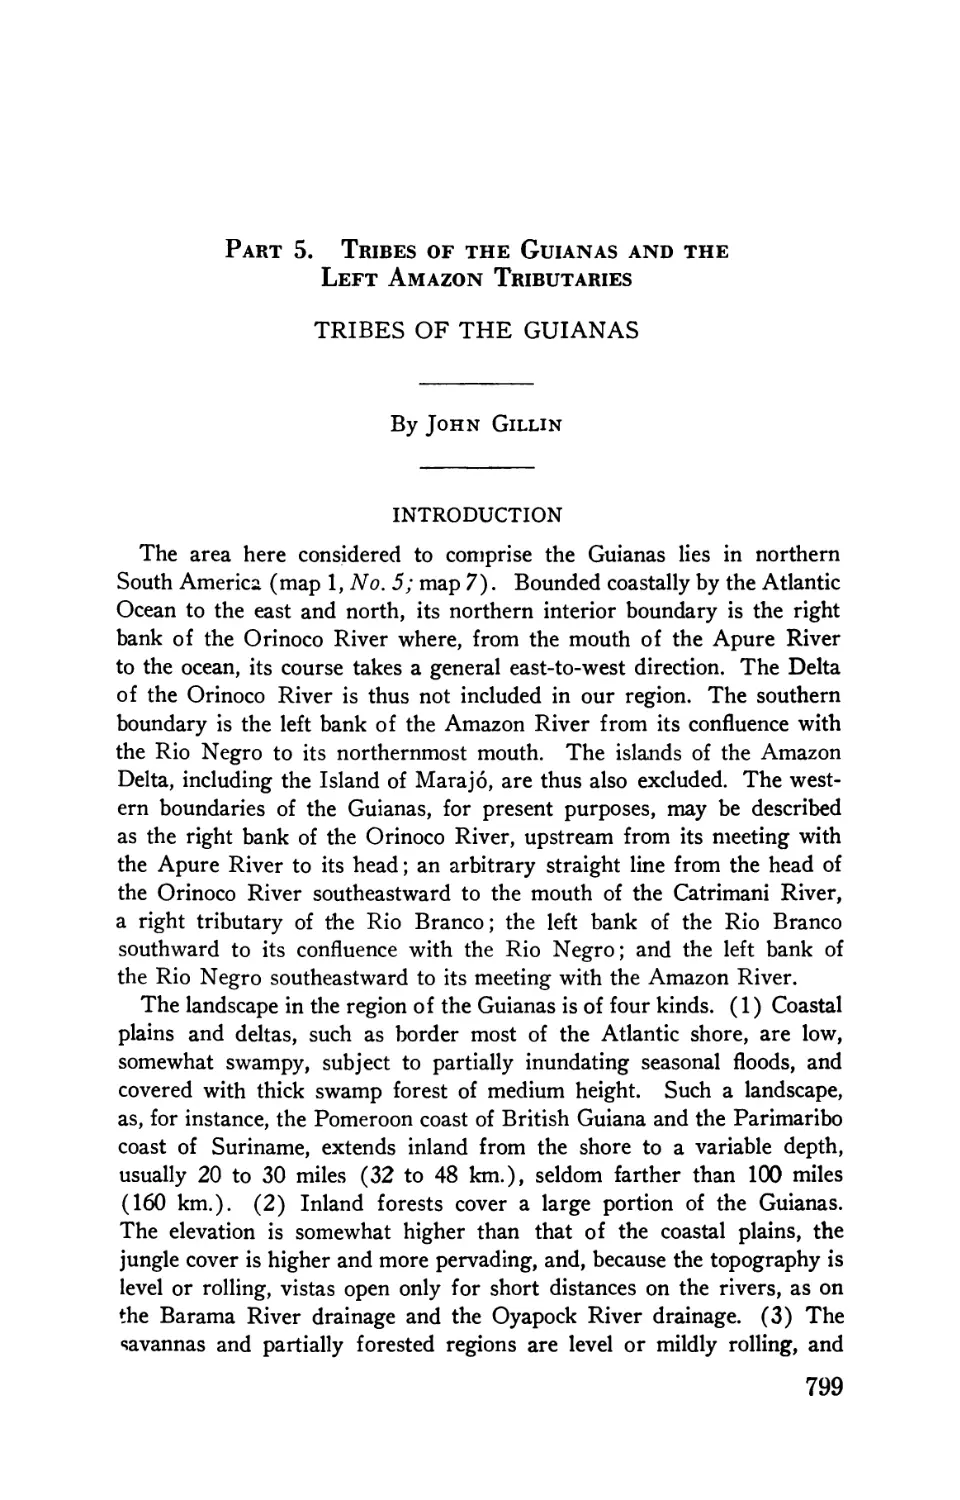 Part 5. Tribes of the Guianas and the left Amazon tributaries